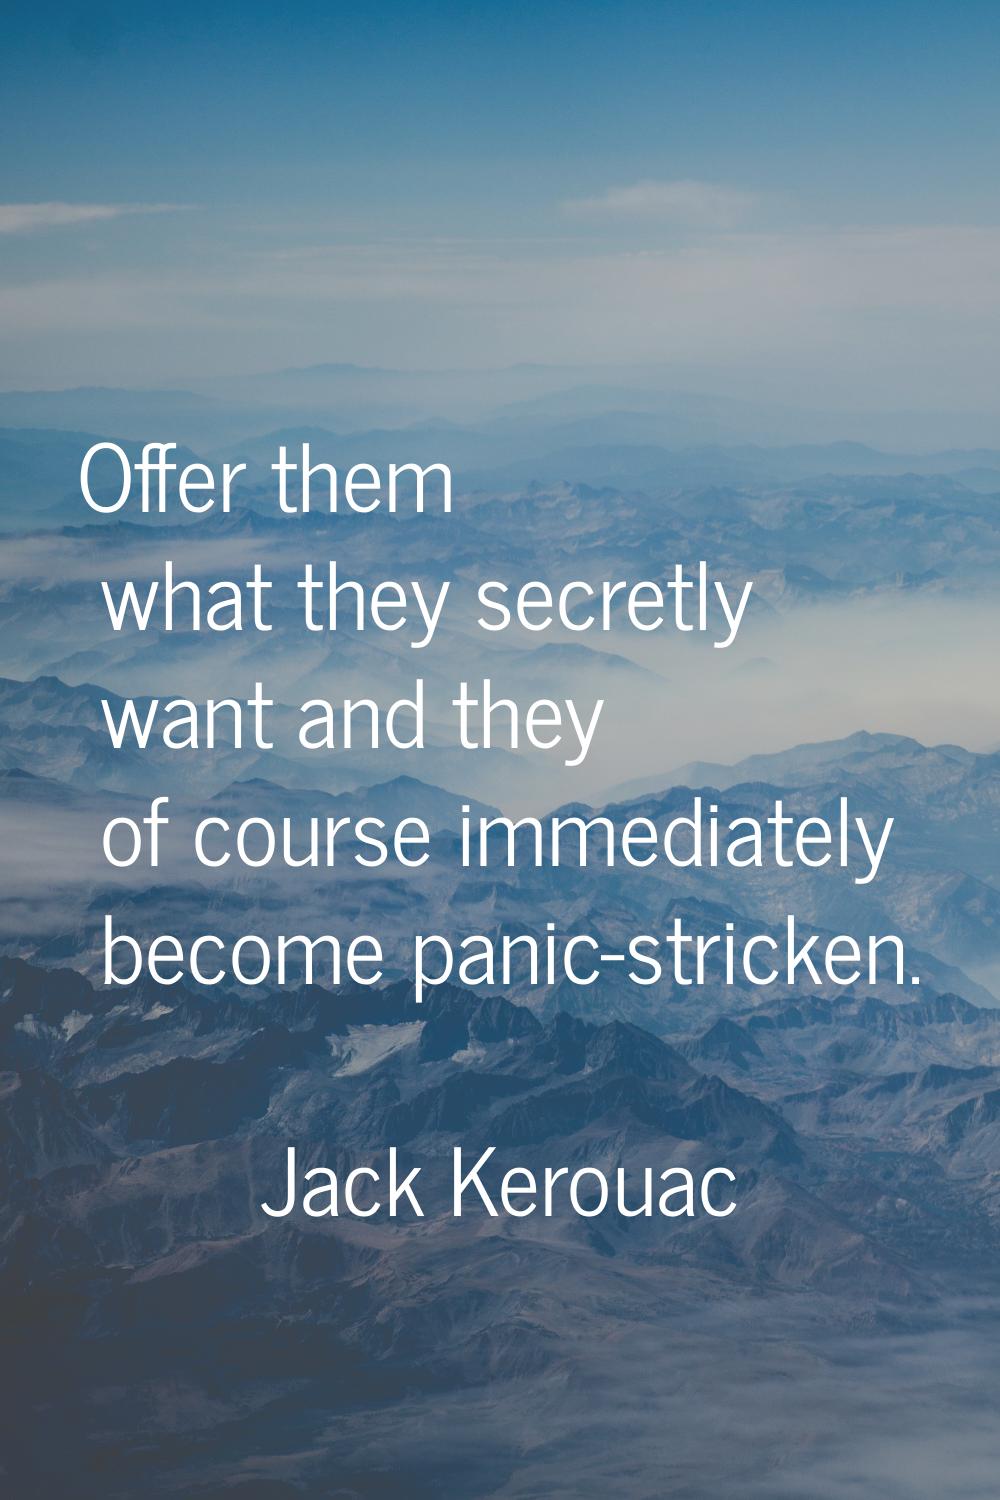 Offer them what they secretly want and they of course immediately become panic-stricken.